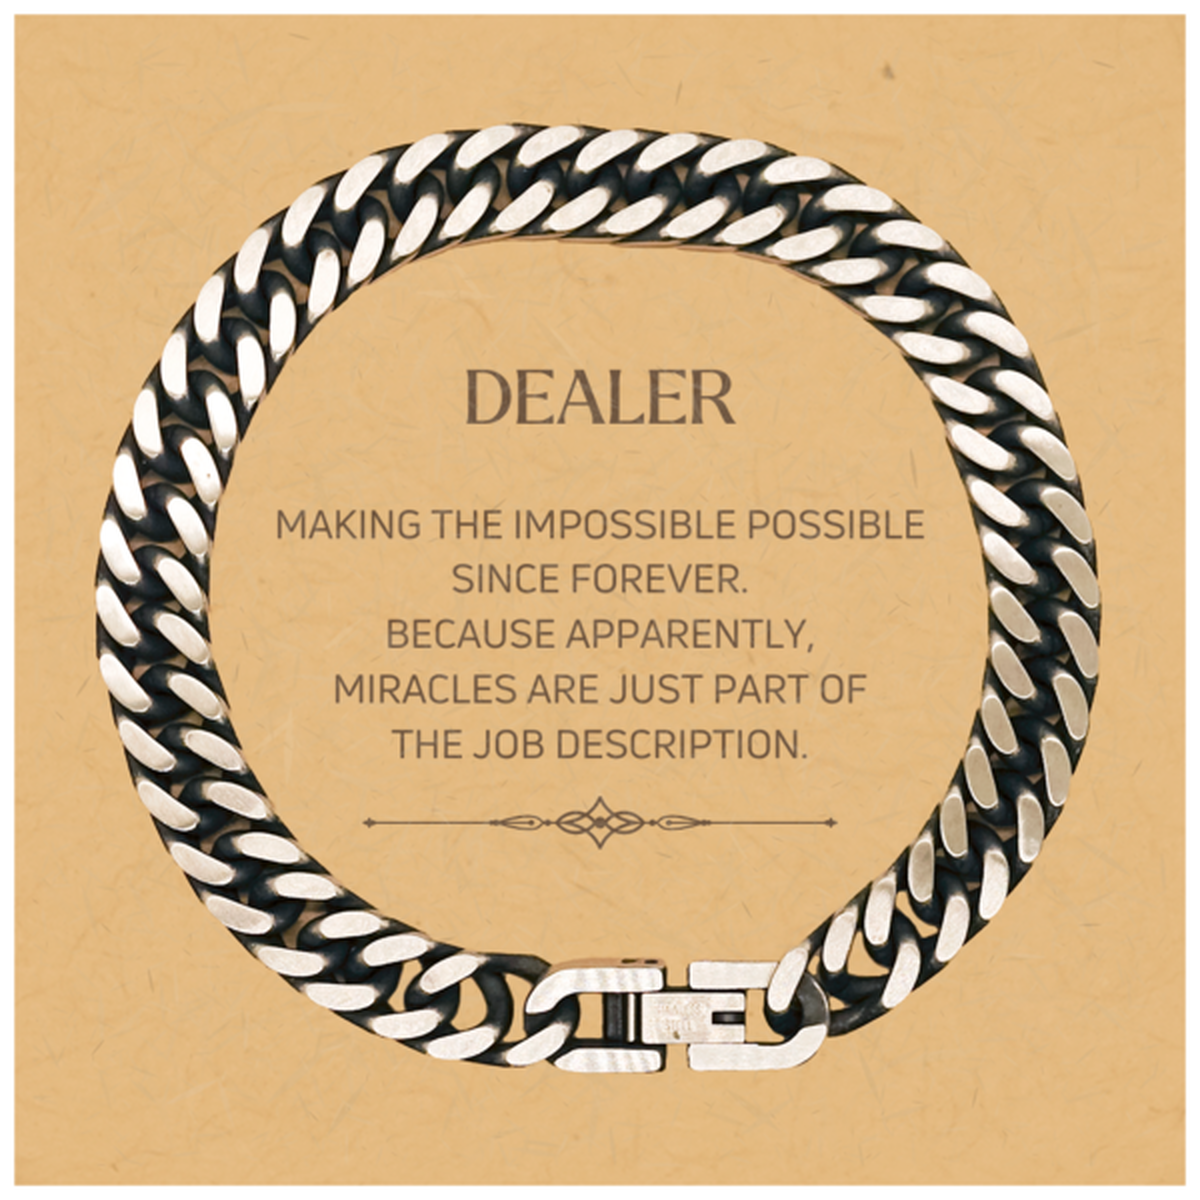 Funny Dealer Gifts, Miracles are just part of the job description, Inspirational Birthday Christmas Cuban Link Chain Bracelet For Dealer, Men, Women, Coworkers, Friends, Boss